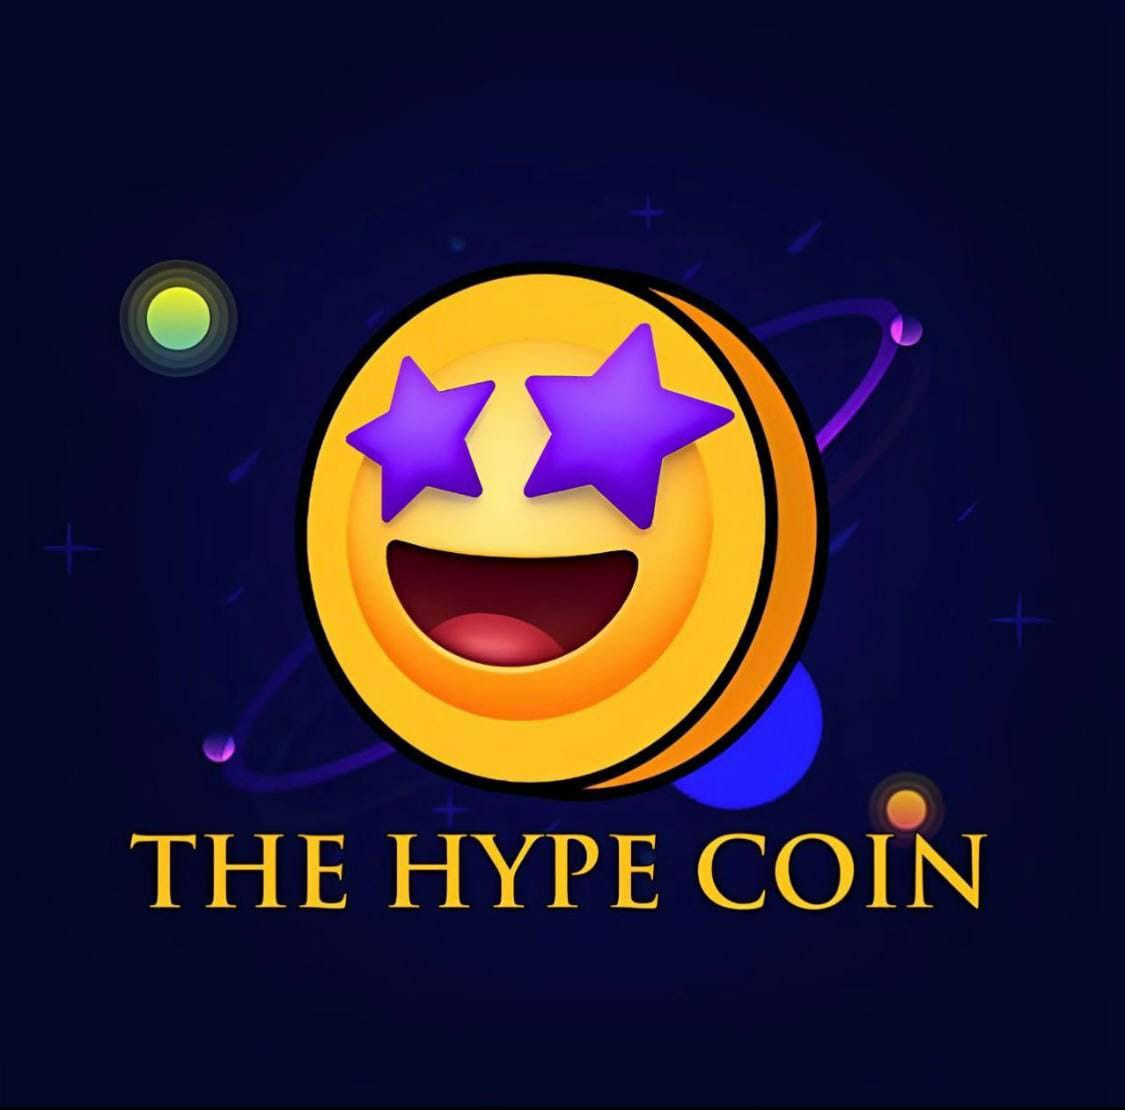 , Dogecoin Early Adopter launches “The Hype Coin” creating a new opportunity for investors to cash in.